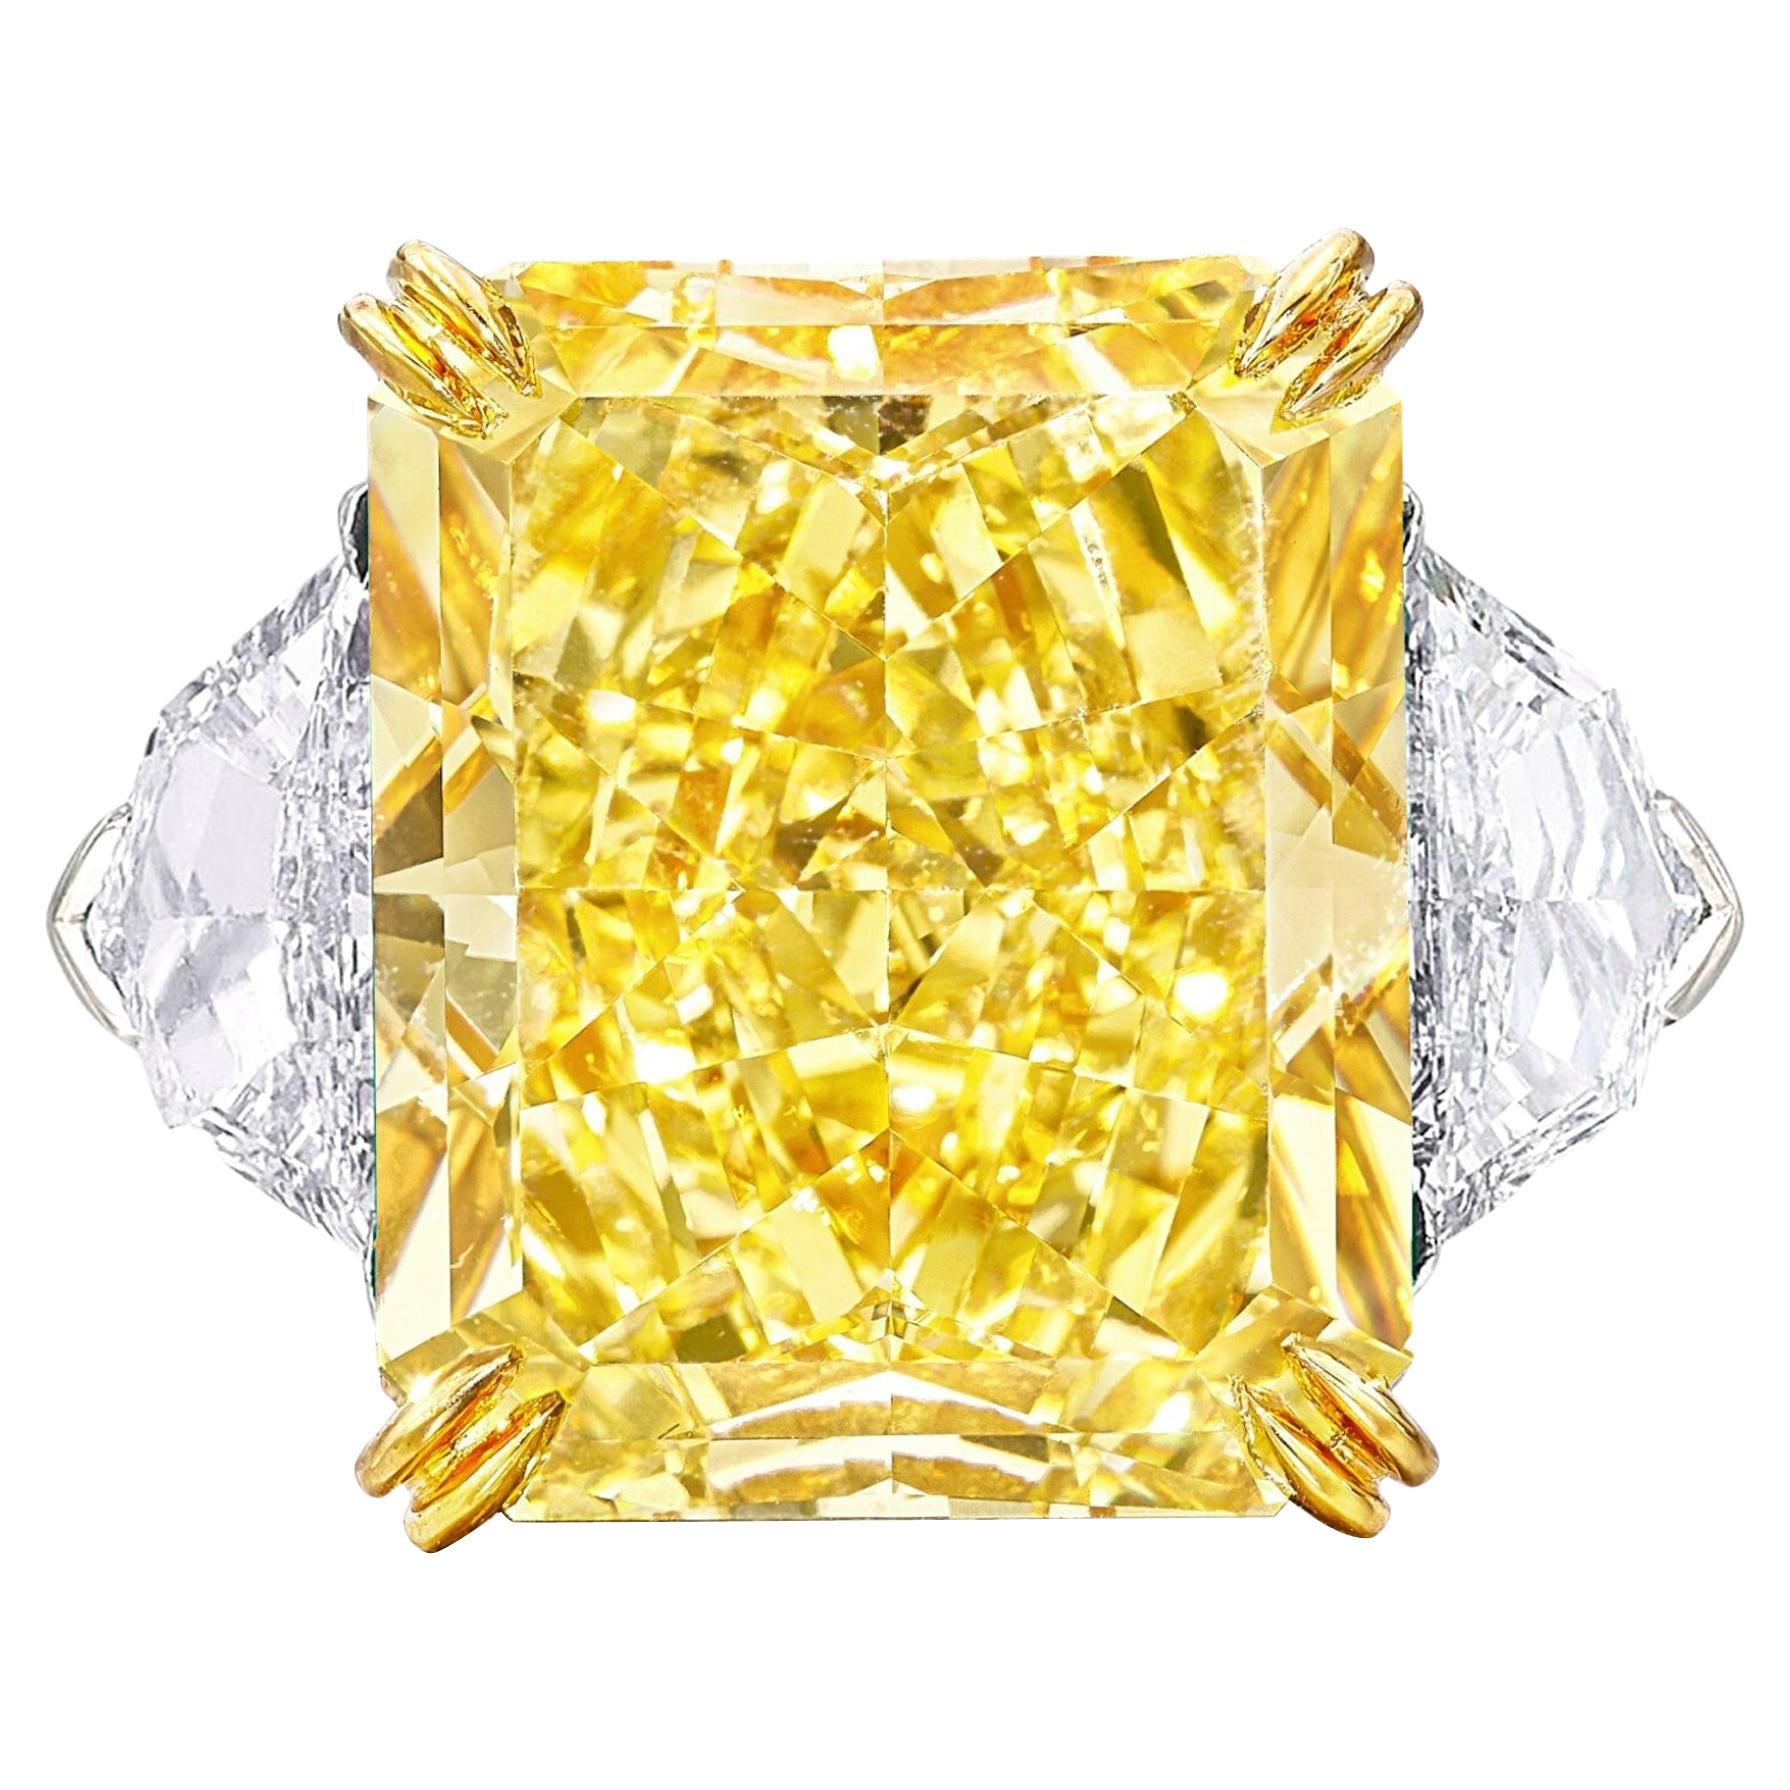 Exceptional GIA Certified 10.80 Carat Fancy Yellow Diamond Ring